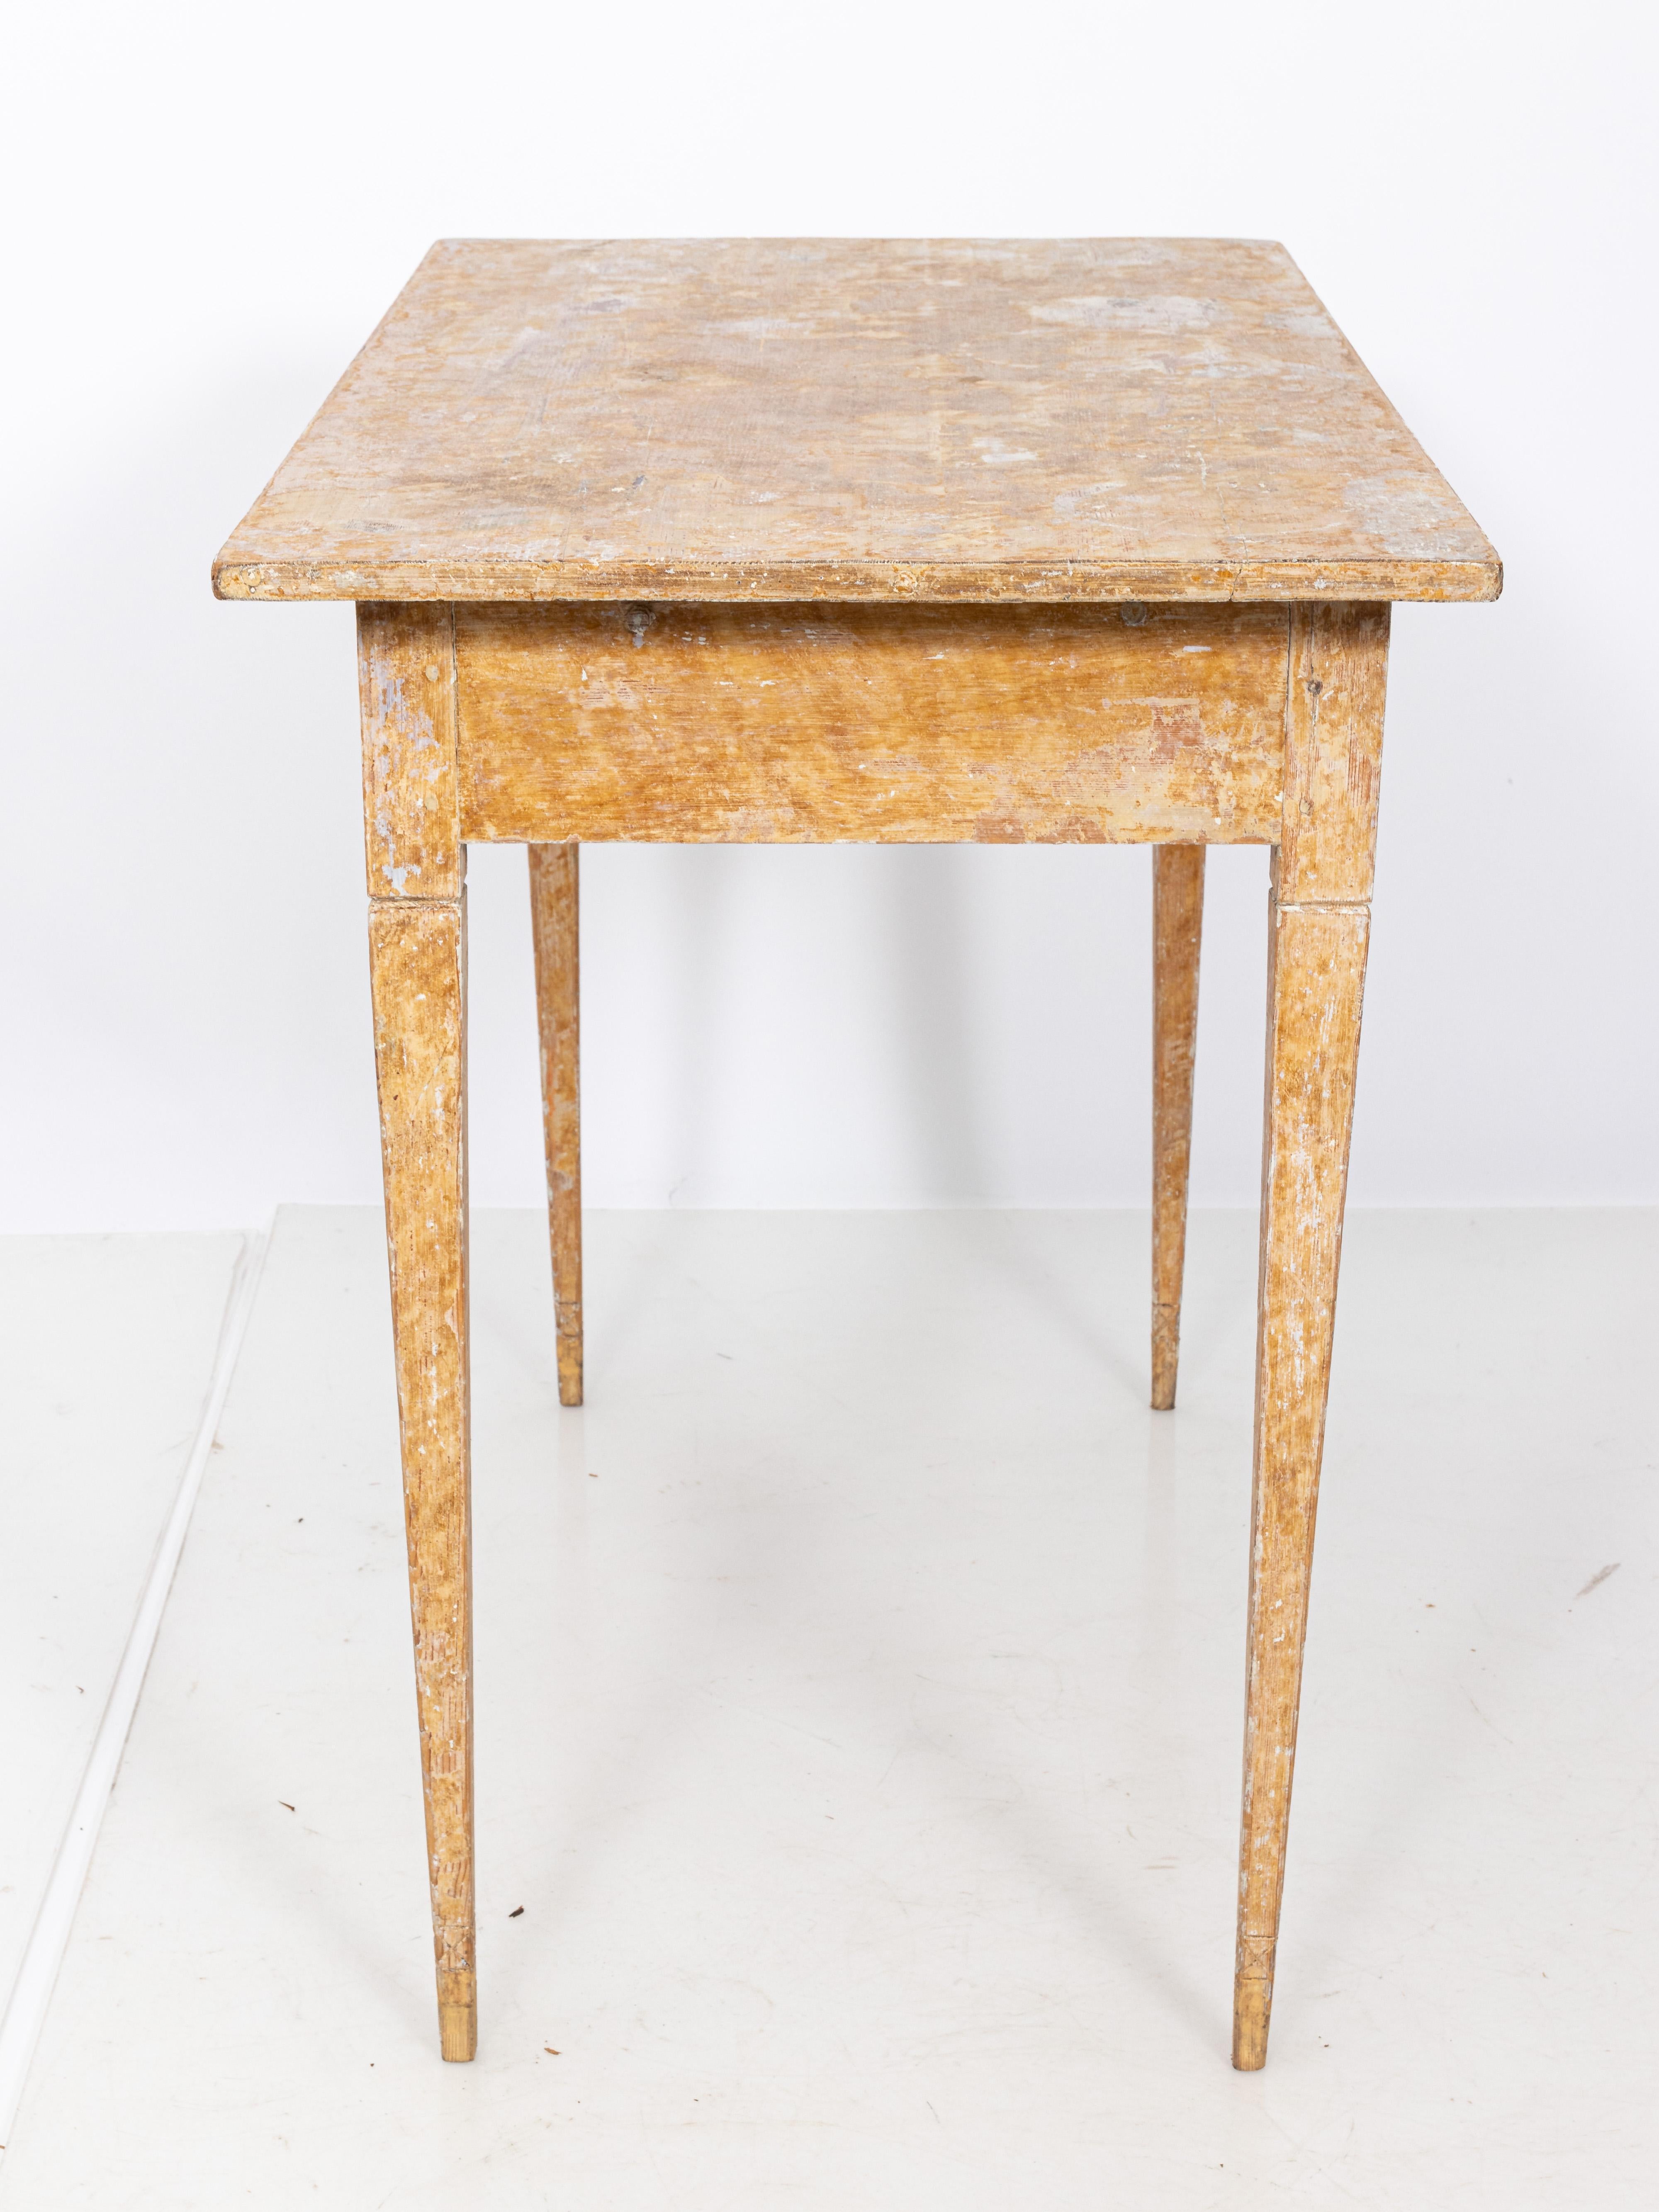 Antique Gustavian Style Writing Desk with Dry Scraped Finish 2